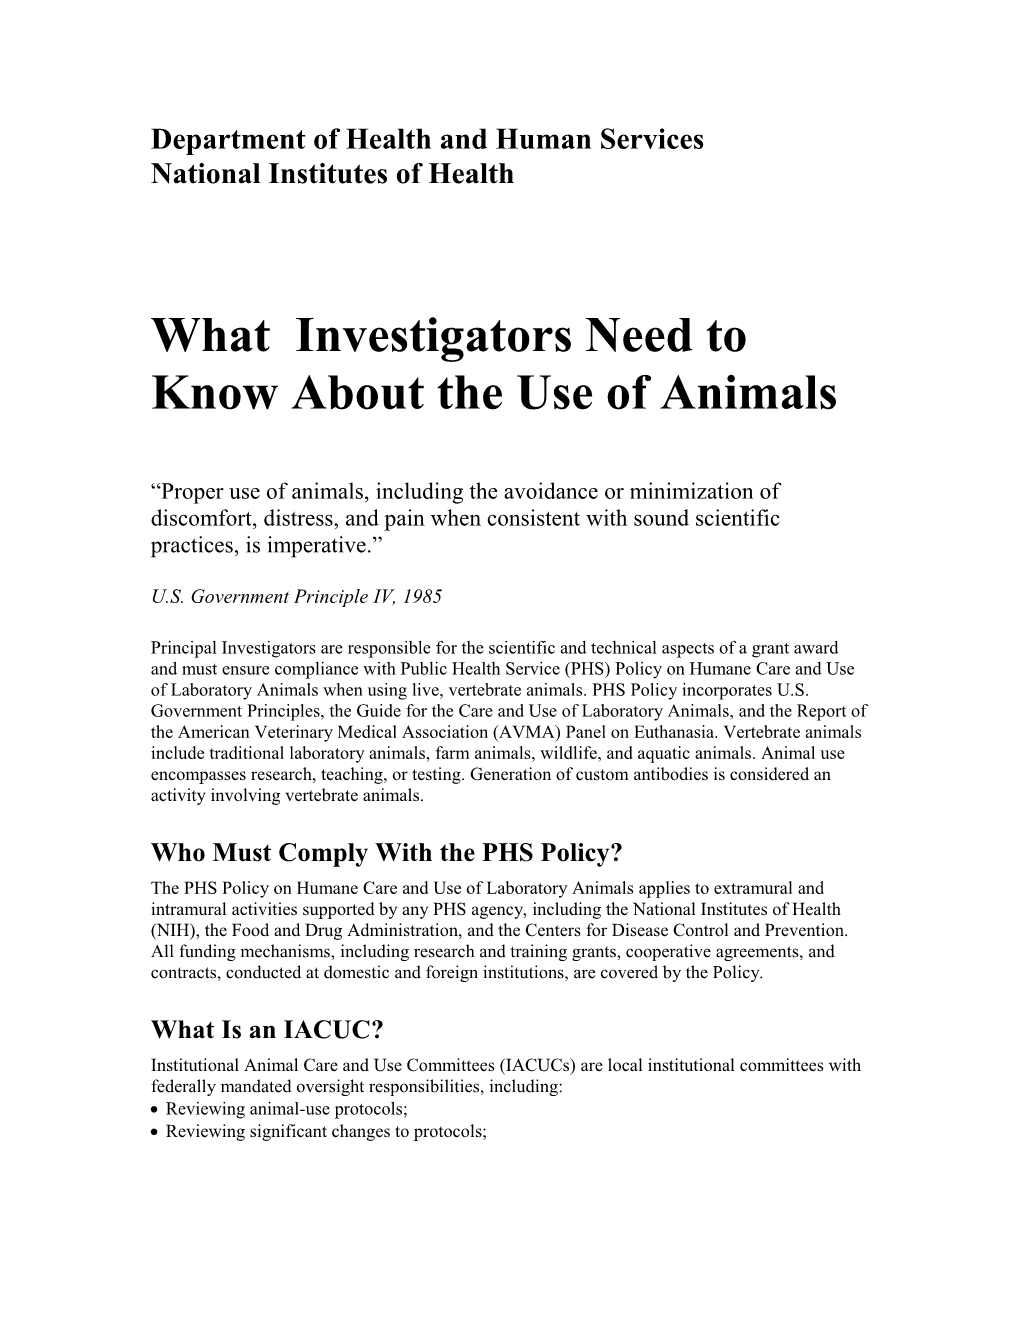 What Investigators Need to Know About the Use of Animals, June 19, 2006